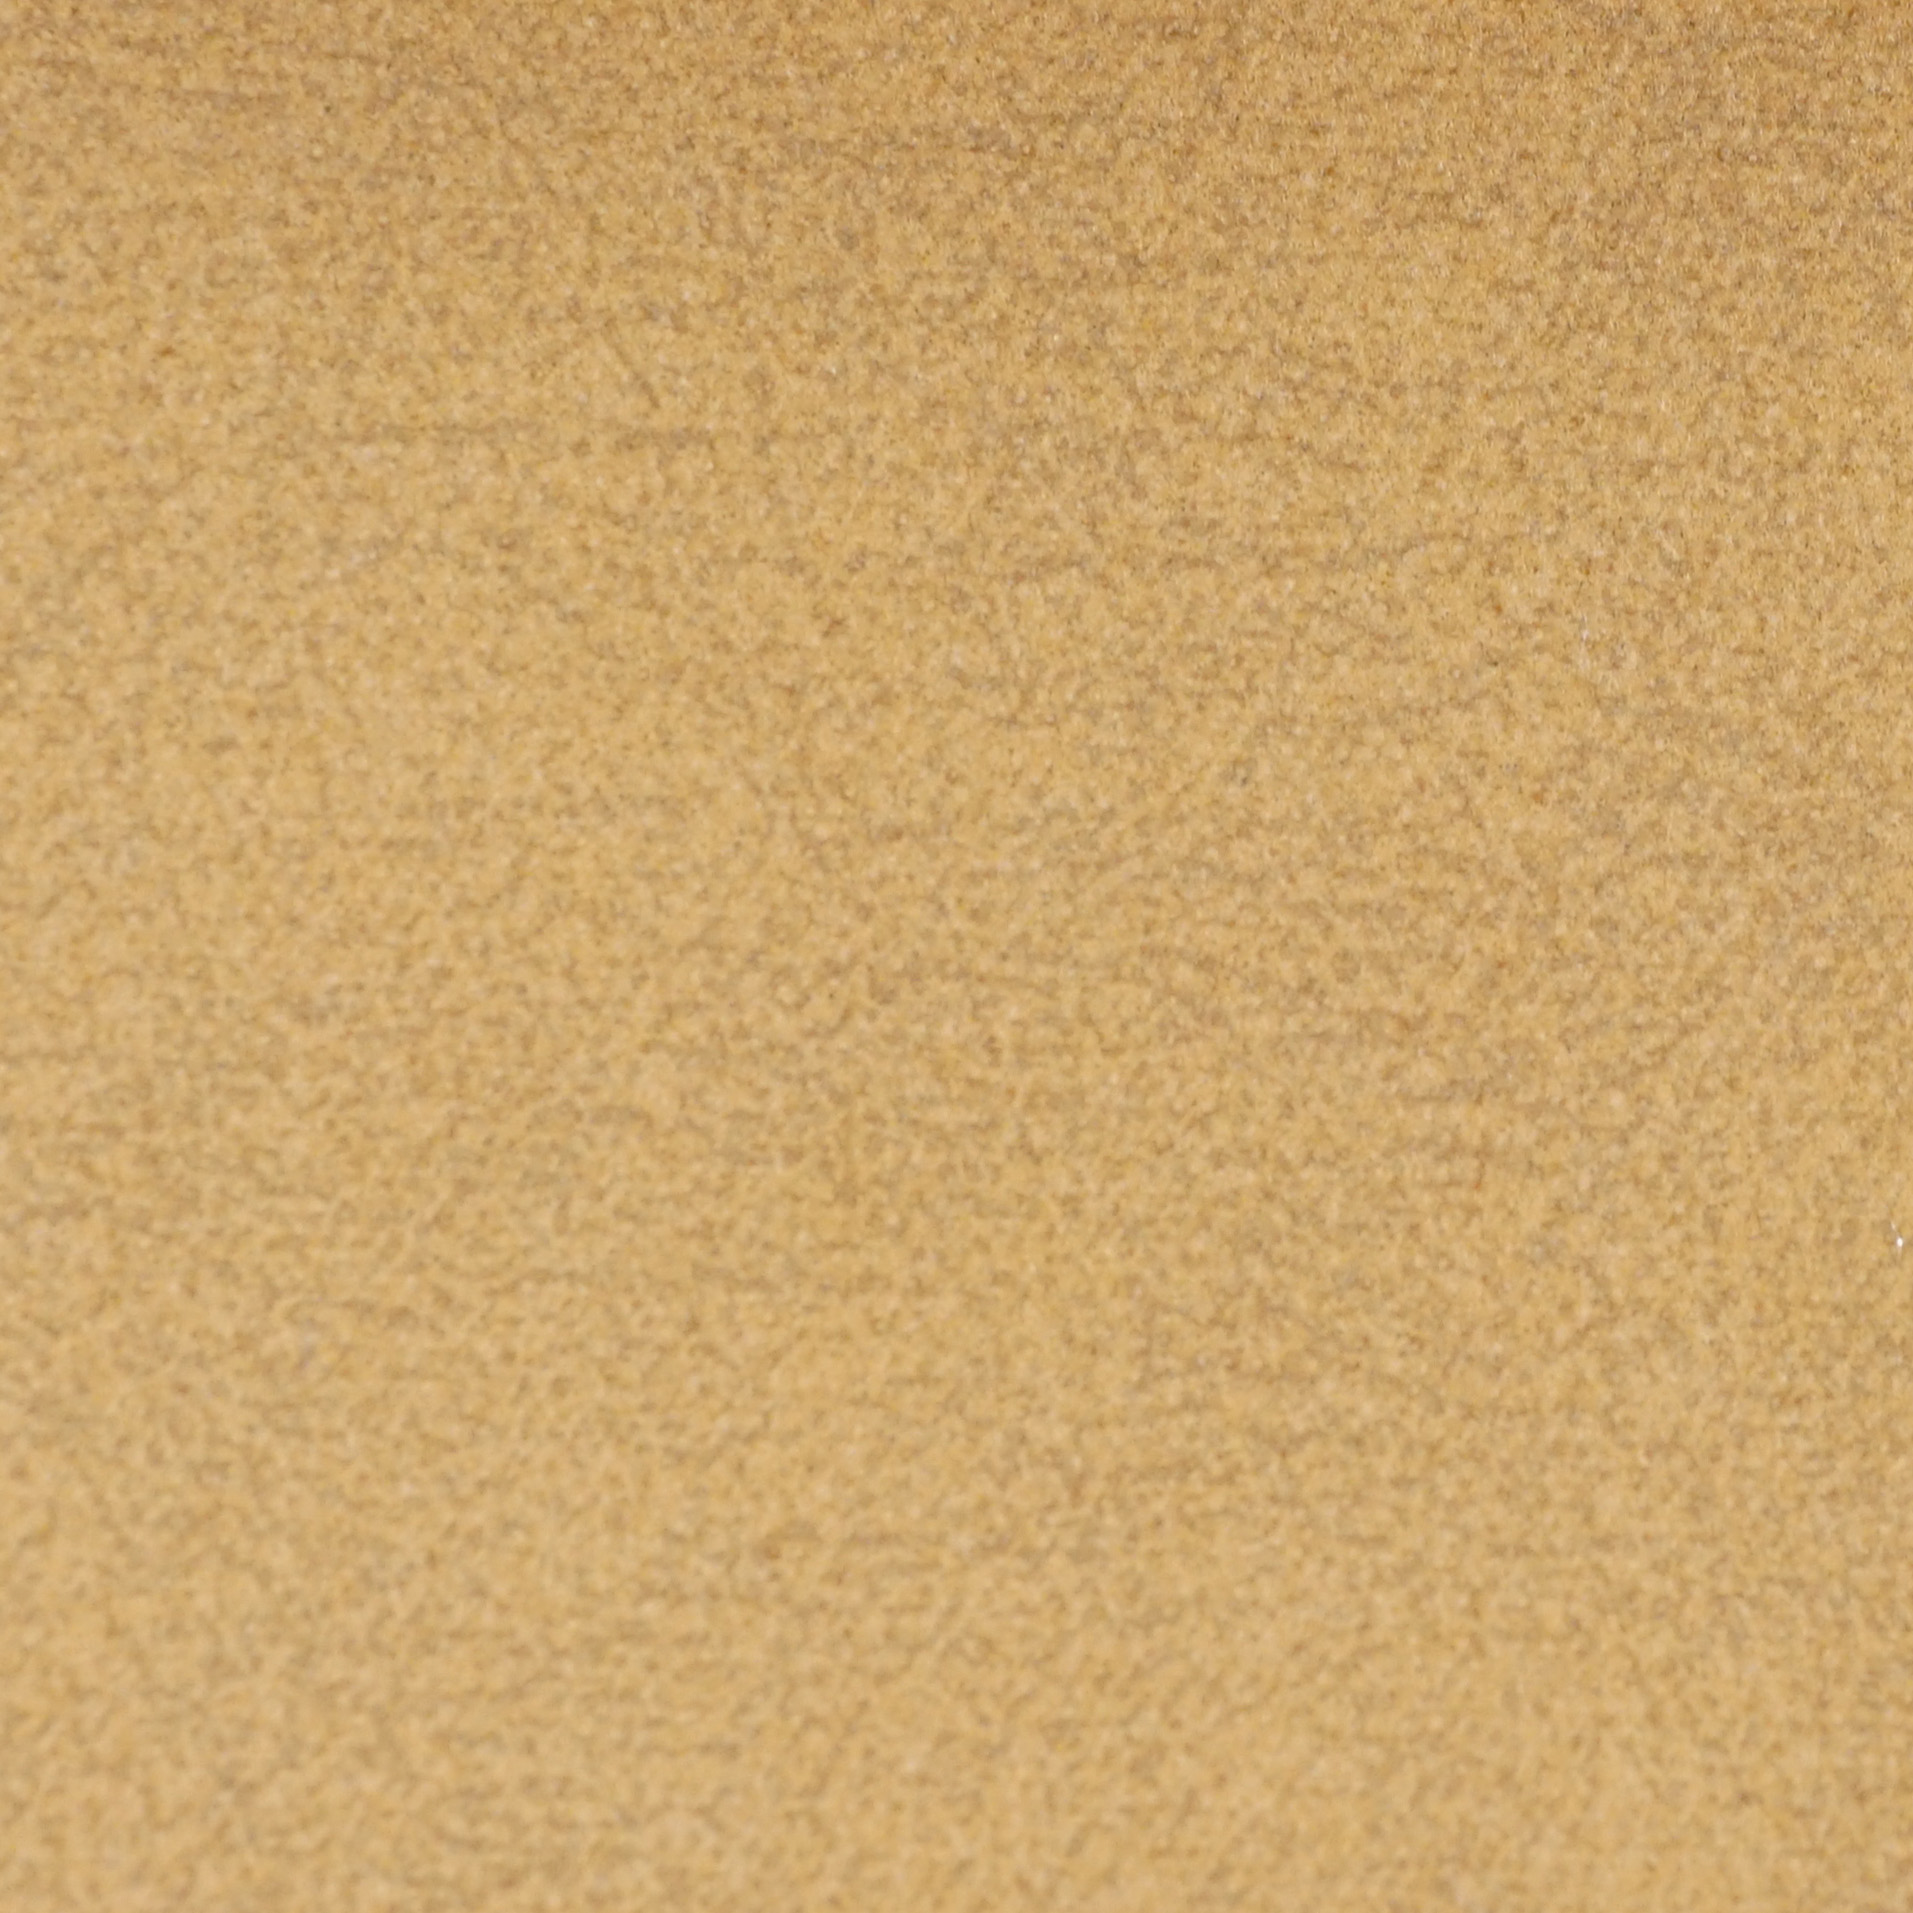 100% Polyester Bronzed Suede Leather Feel Upholstery Sofa Fabric 